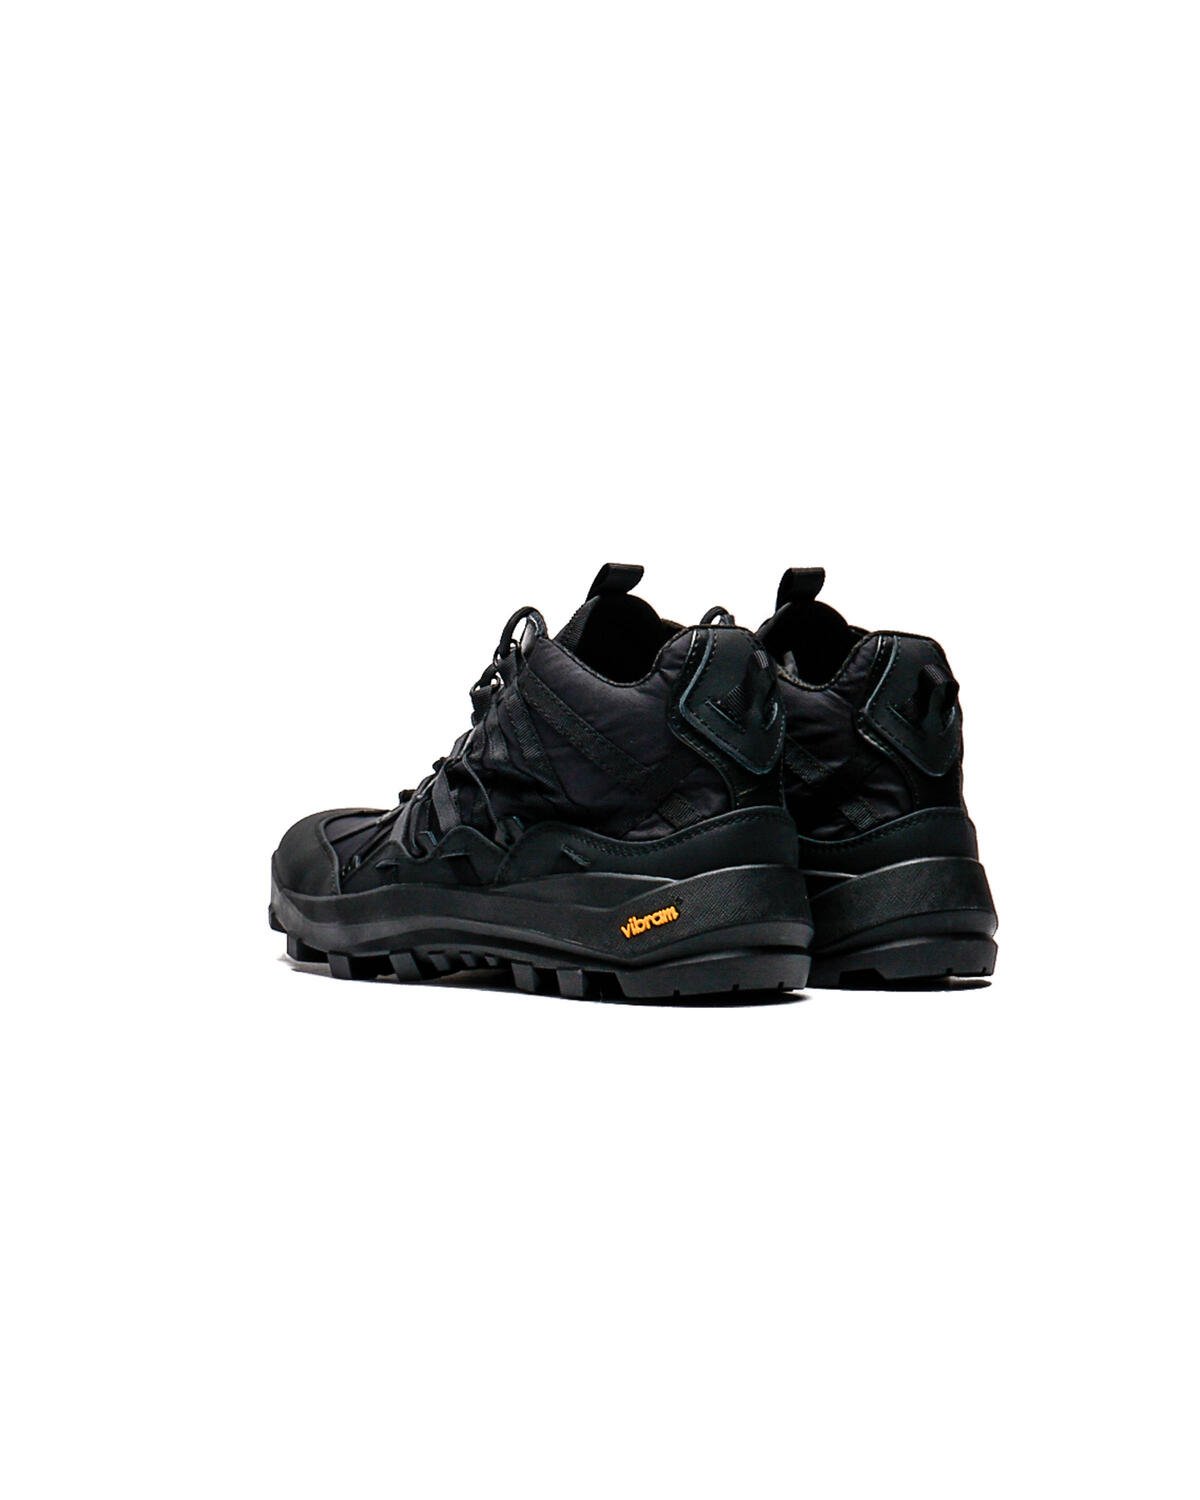 NwfpsShops STORE - BK - SNOW PEAK SP Mountain Treck Shoes